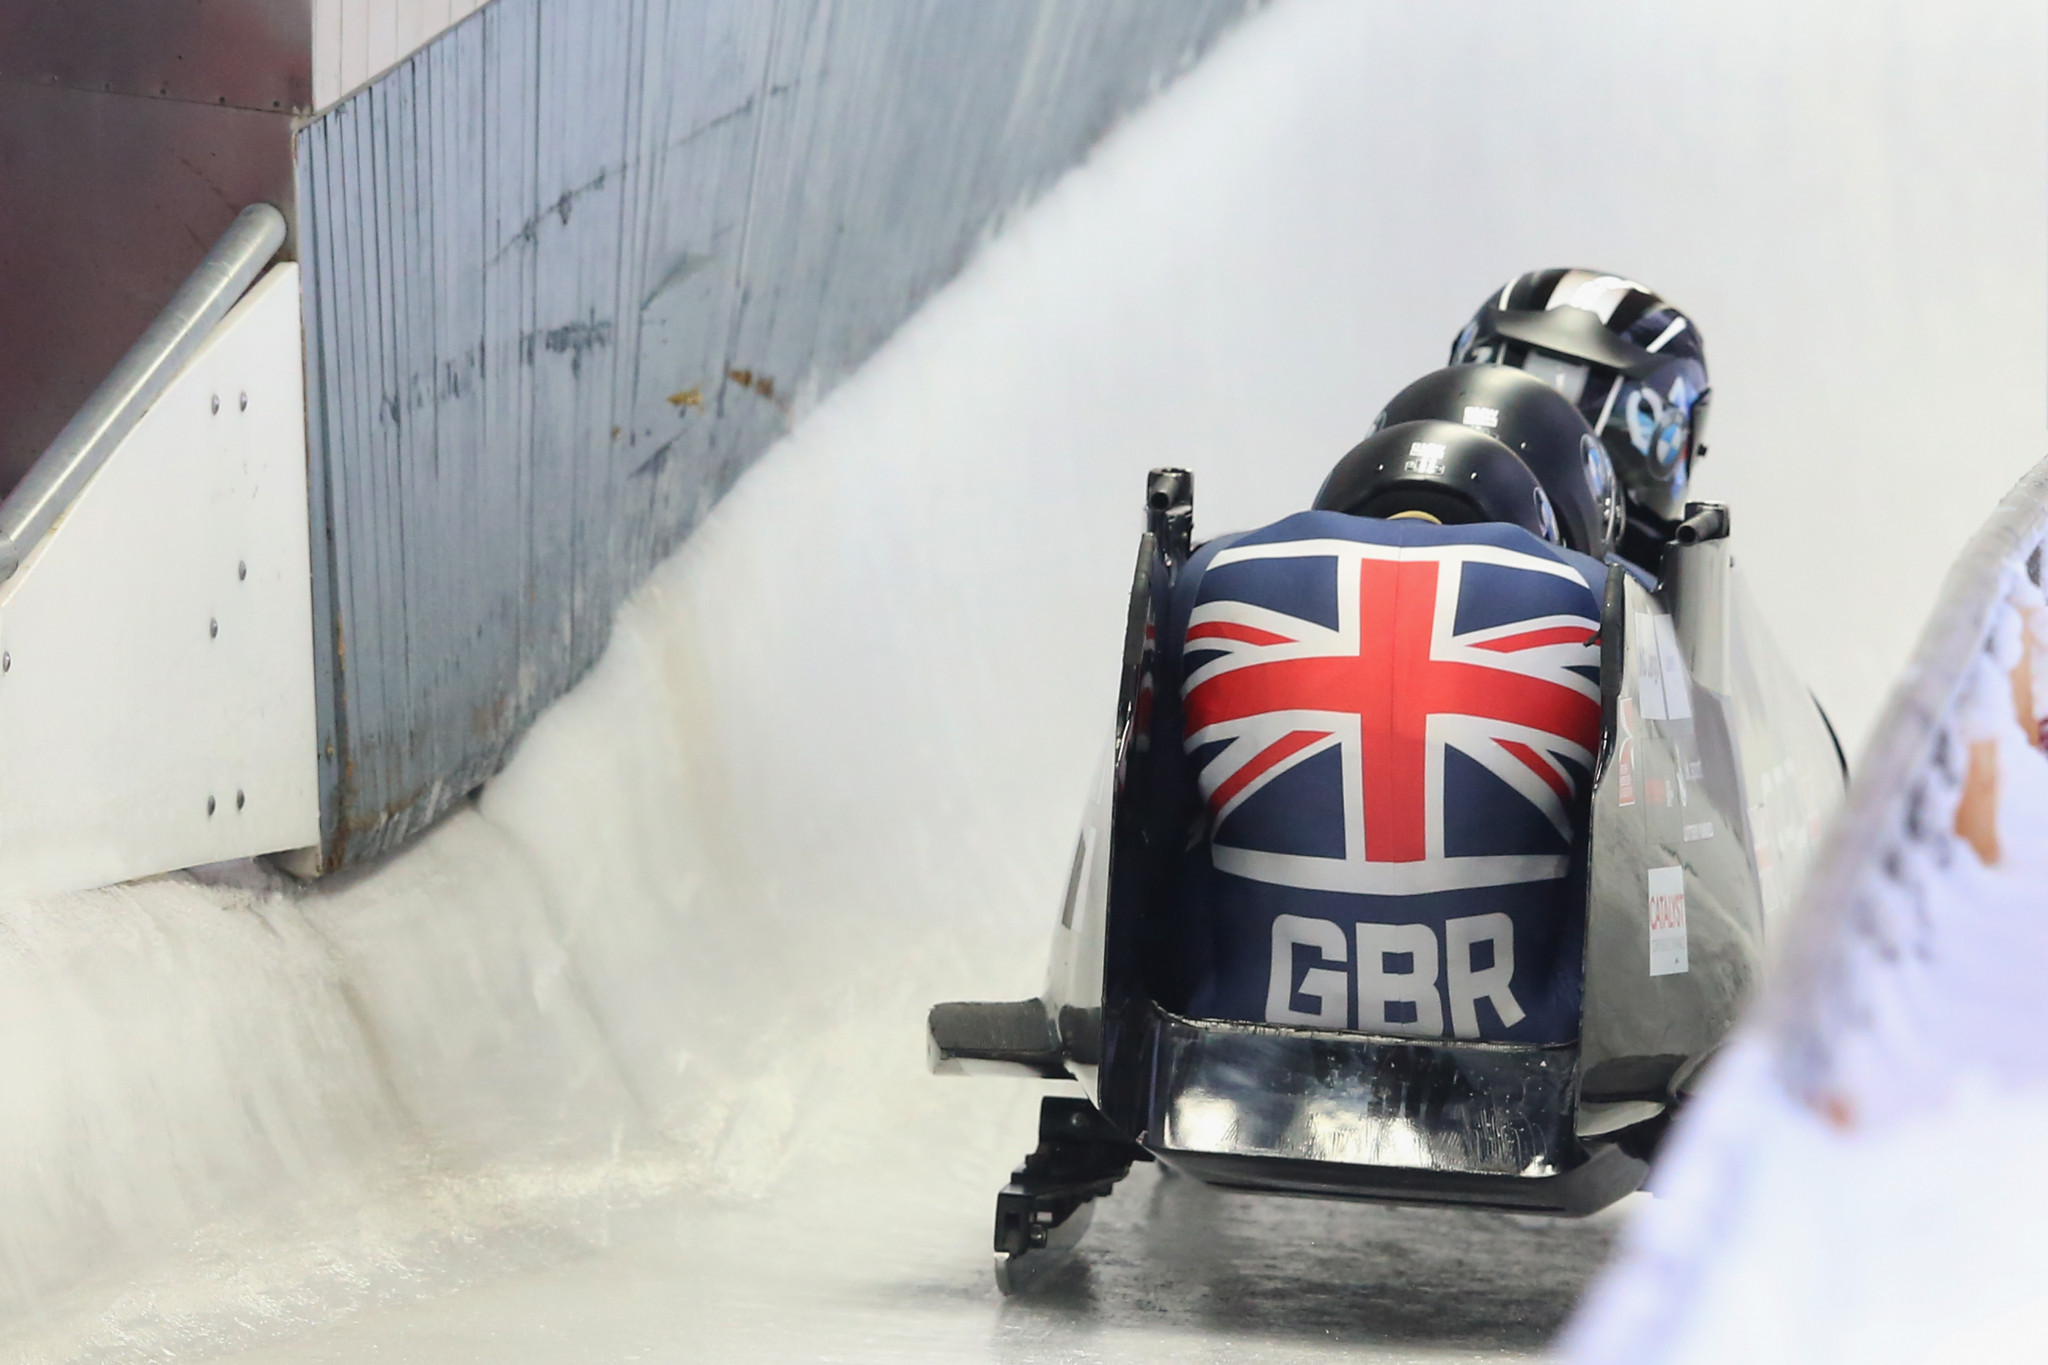 Britain's double Olympian Simons retires from bobsleigh